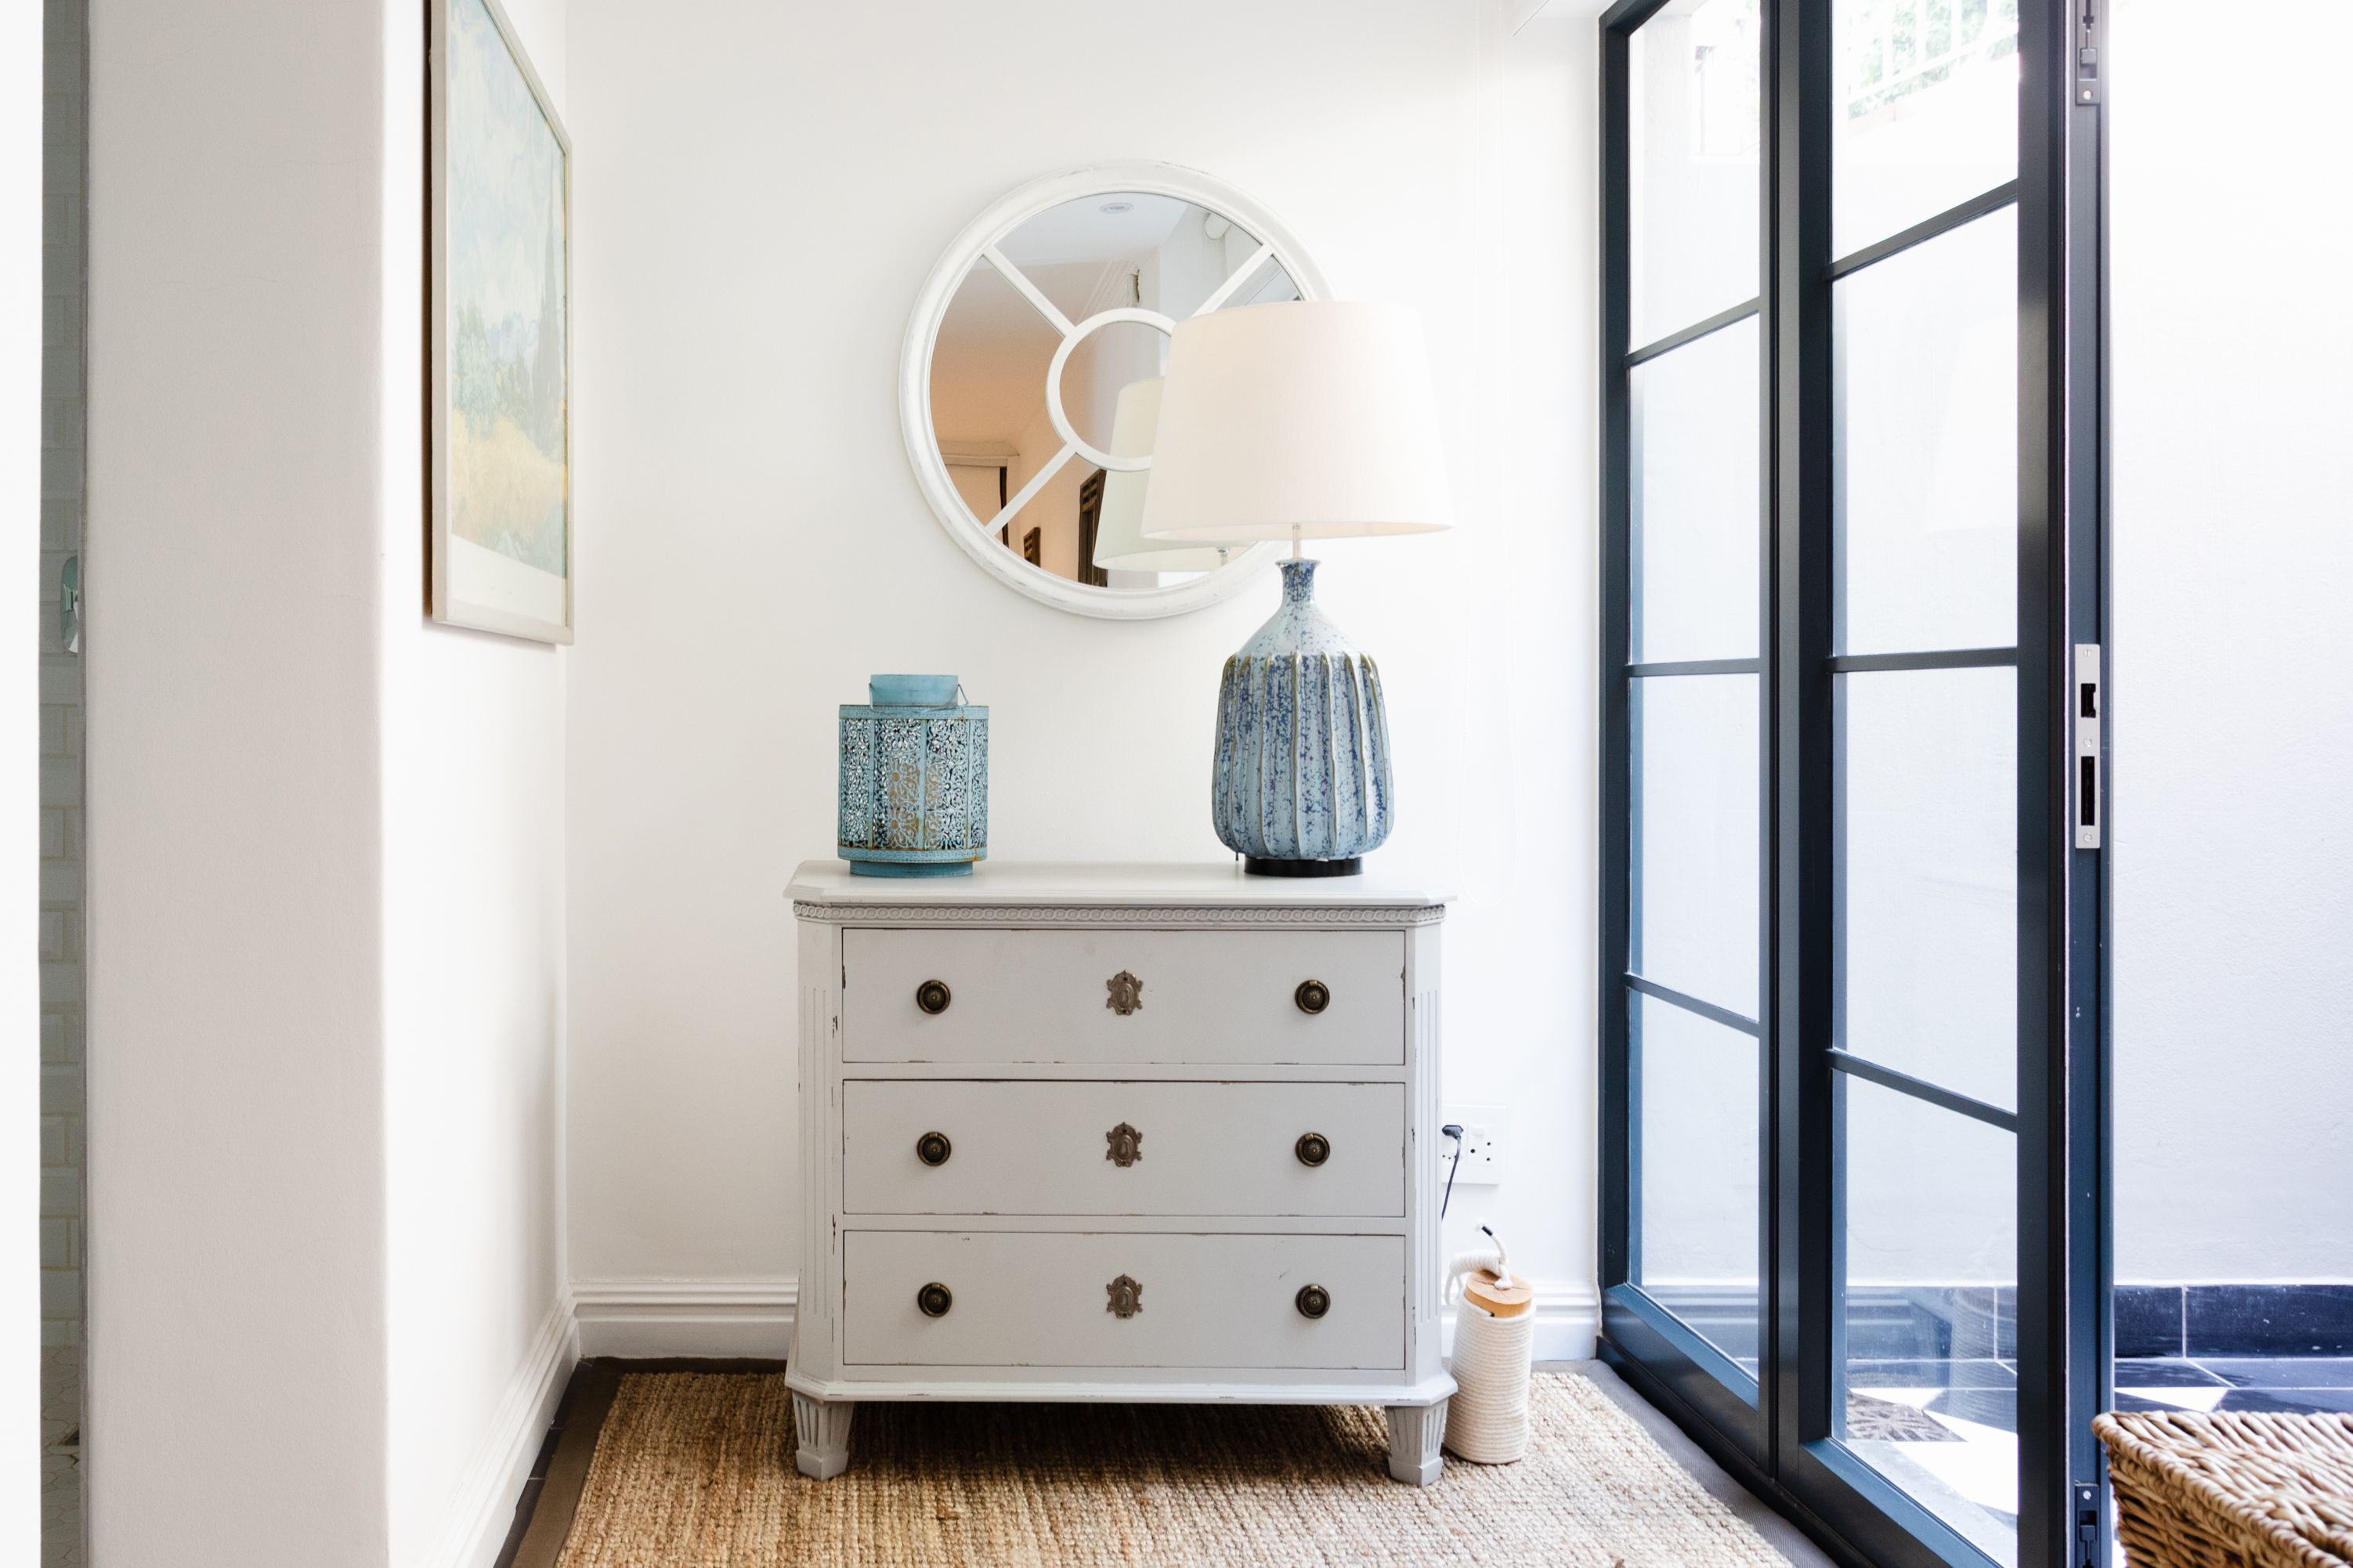 10 Neutral Paint Colors That Never Go Out of Style